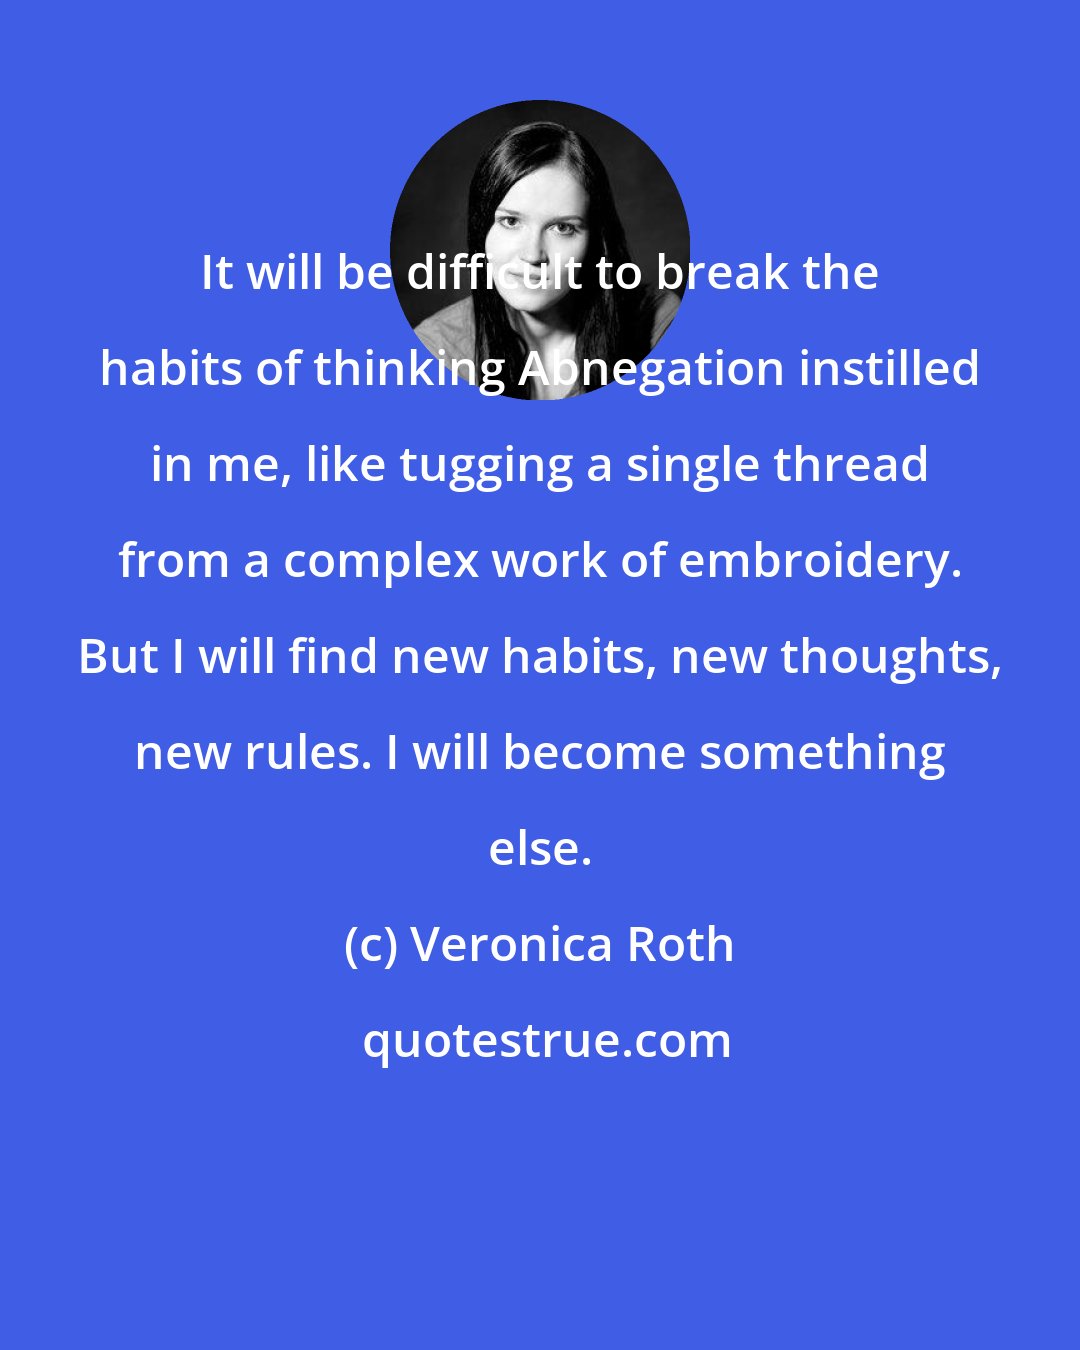 Veronica Roth: It will be difficult to break the habits of thinking Abnegation instilled in me, like tugging a single thread from a complex work of embroidery. But I will find new habits, new thoughts, new rules. I will become something else.